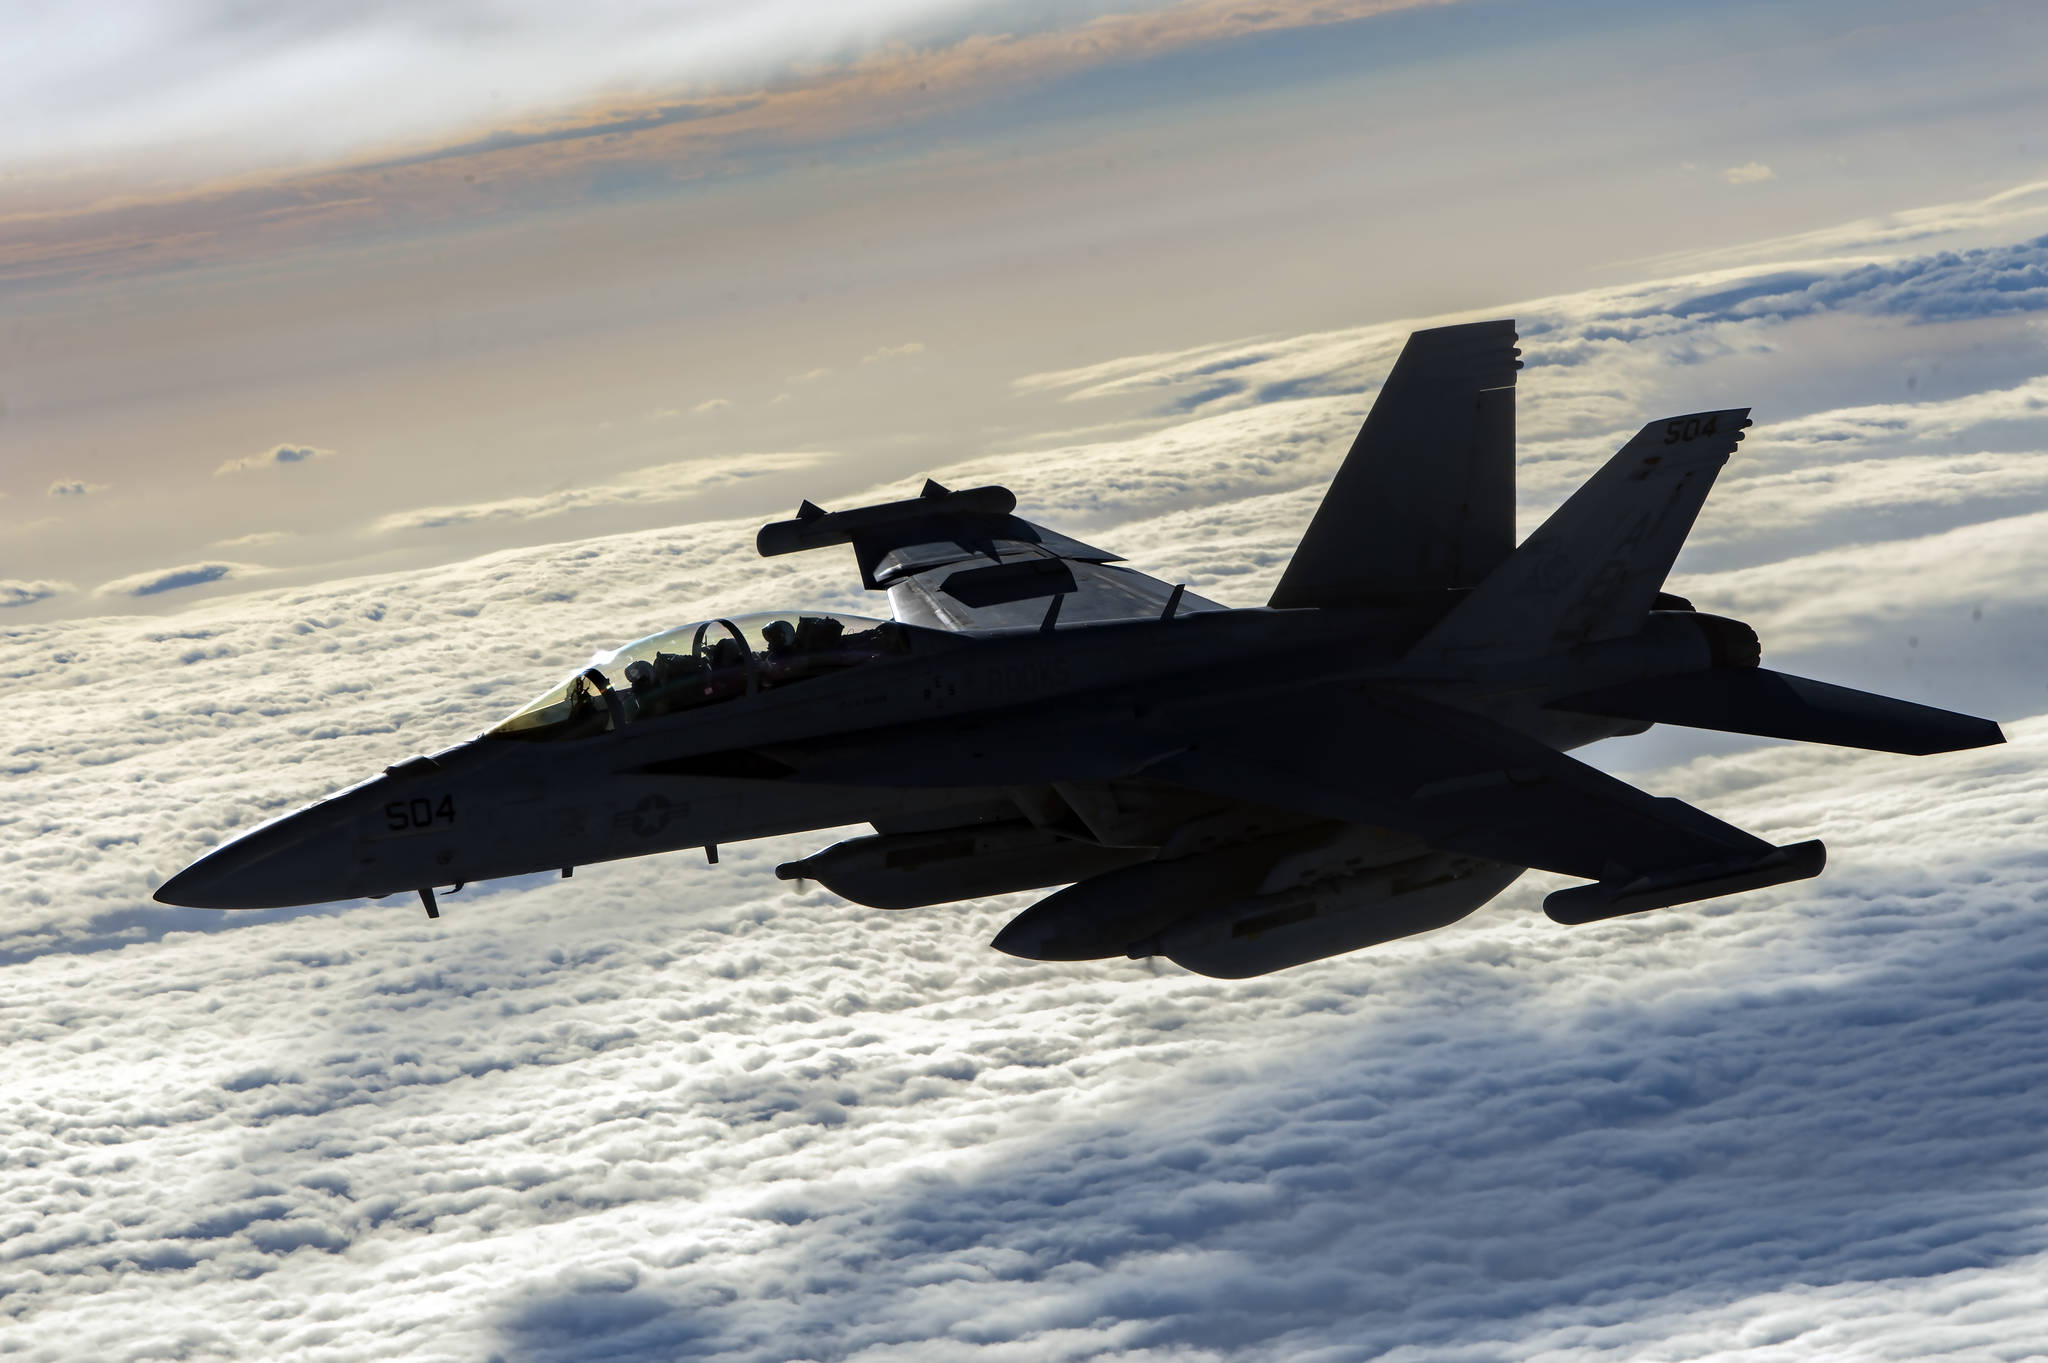 A U.S. Navy EA-18G Growler flies over Afghanistan, Jan. 23, 2020. The EA-18G has the capabilities to perform a wide range of enemy defense suppression missions with the latest electronic attack technology, jamming pods, and satellite communications. U.S. Air Force photo by Staff Sgt. Matthew Lotz